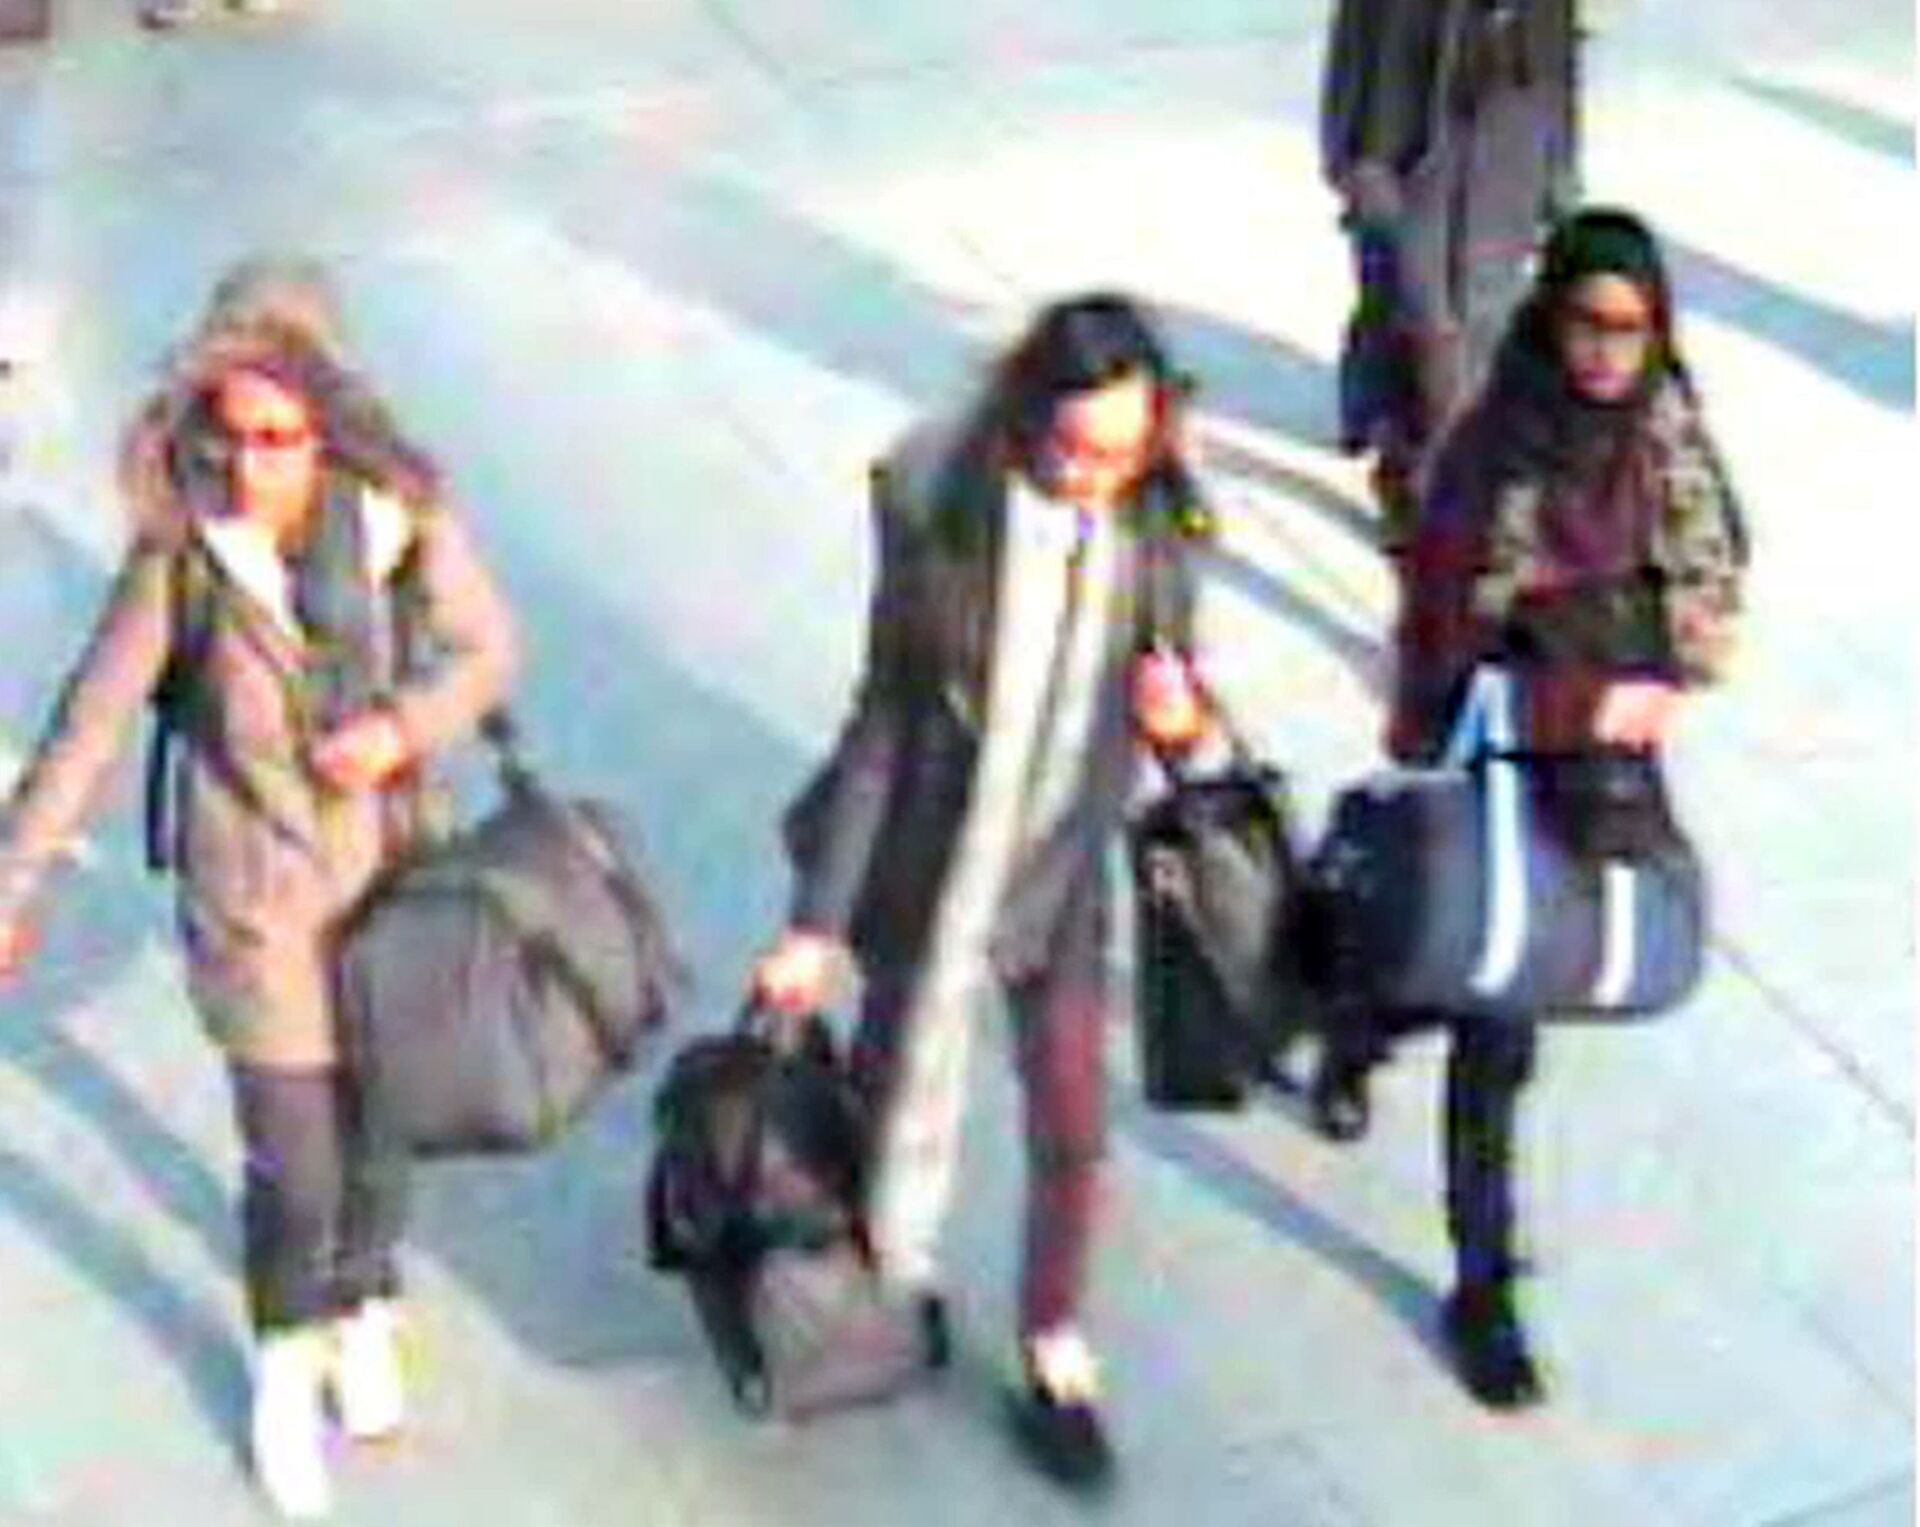 In this still taken from CCTV issued by the Metropolitan Police in London on Feb. 23, 2015,  15-year-old Amira Abase, left,  Kadiza Sultana,16, center, and Shamima Begum, 15, walk through Gatwick airport, south of London, before catching their flight to Turkey on Tuesday Feb 17, 2015 - Sputnik International, 1920, 09.11.2021